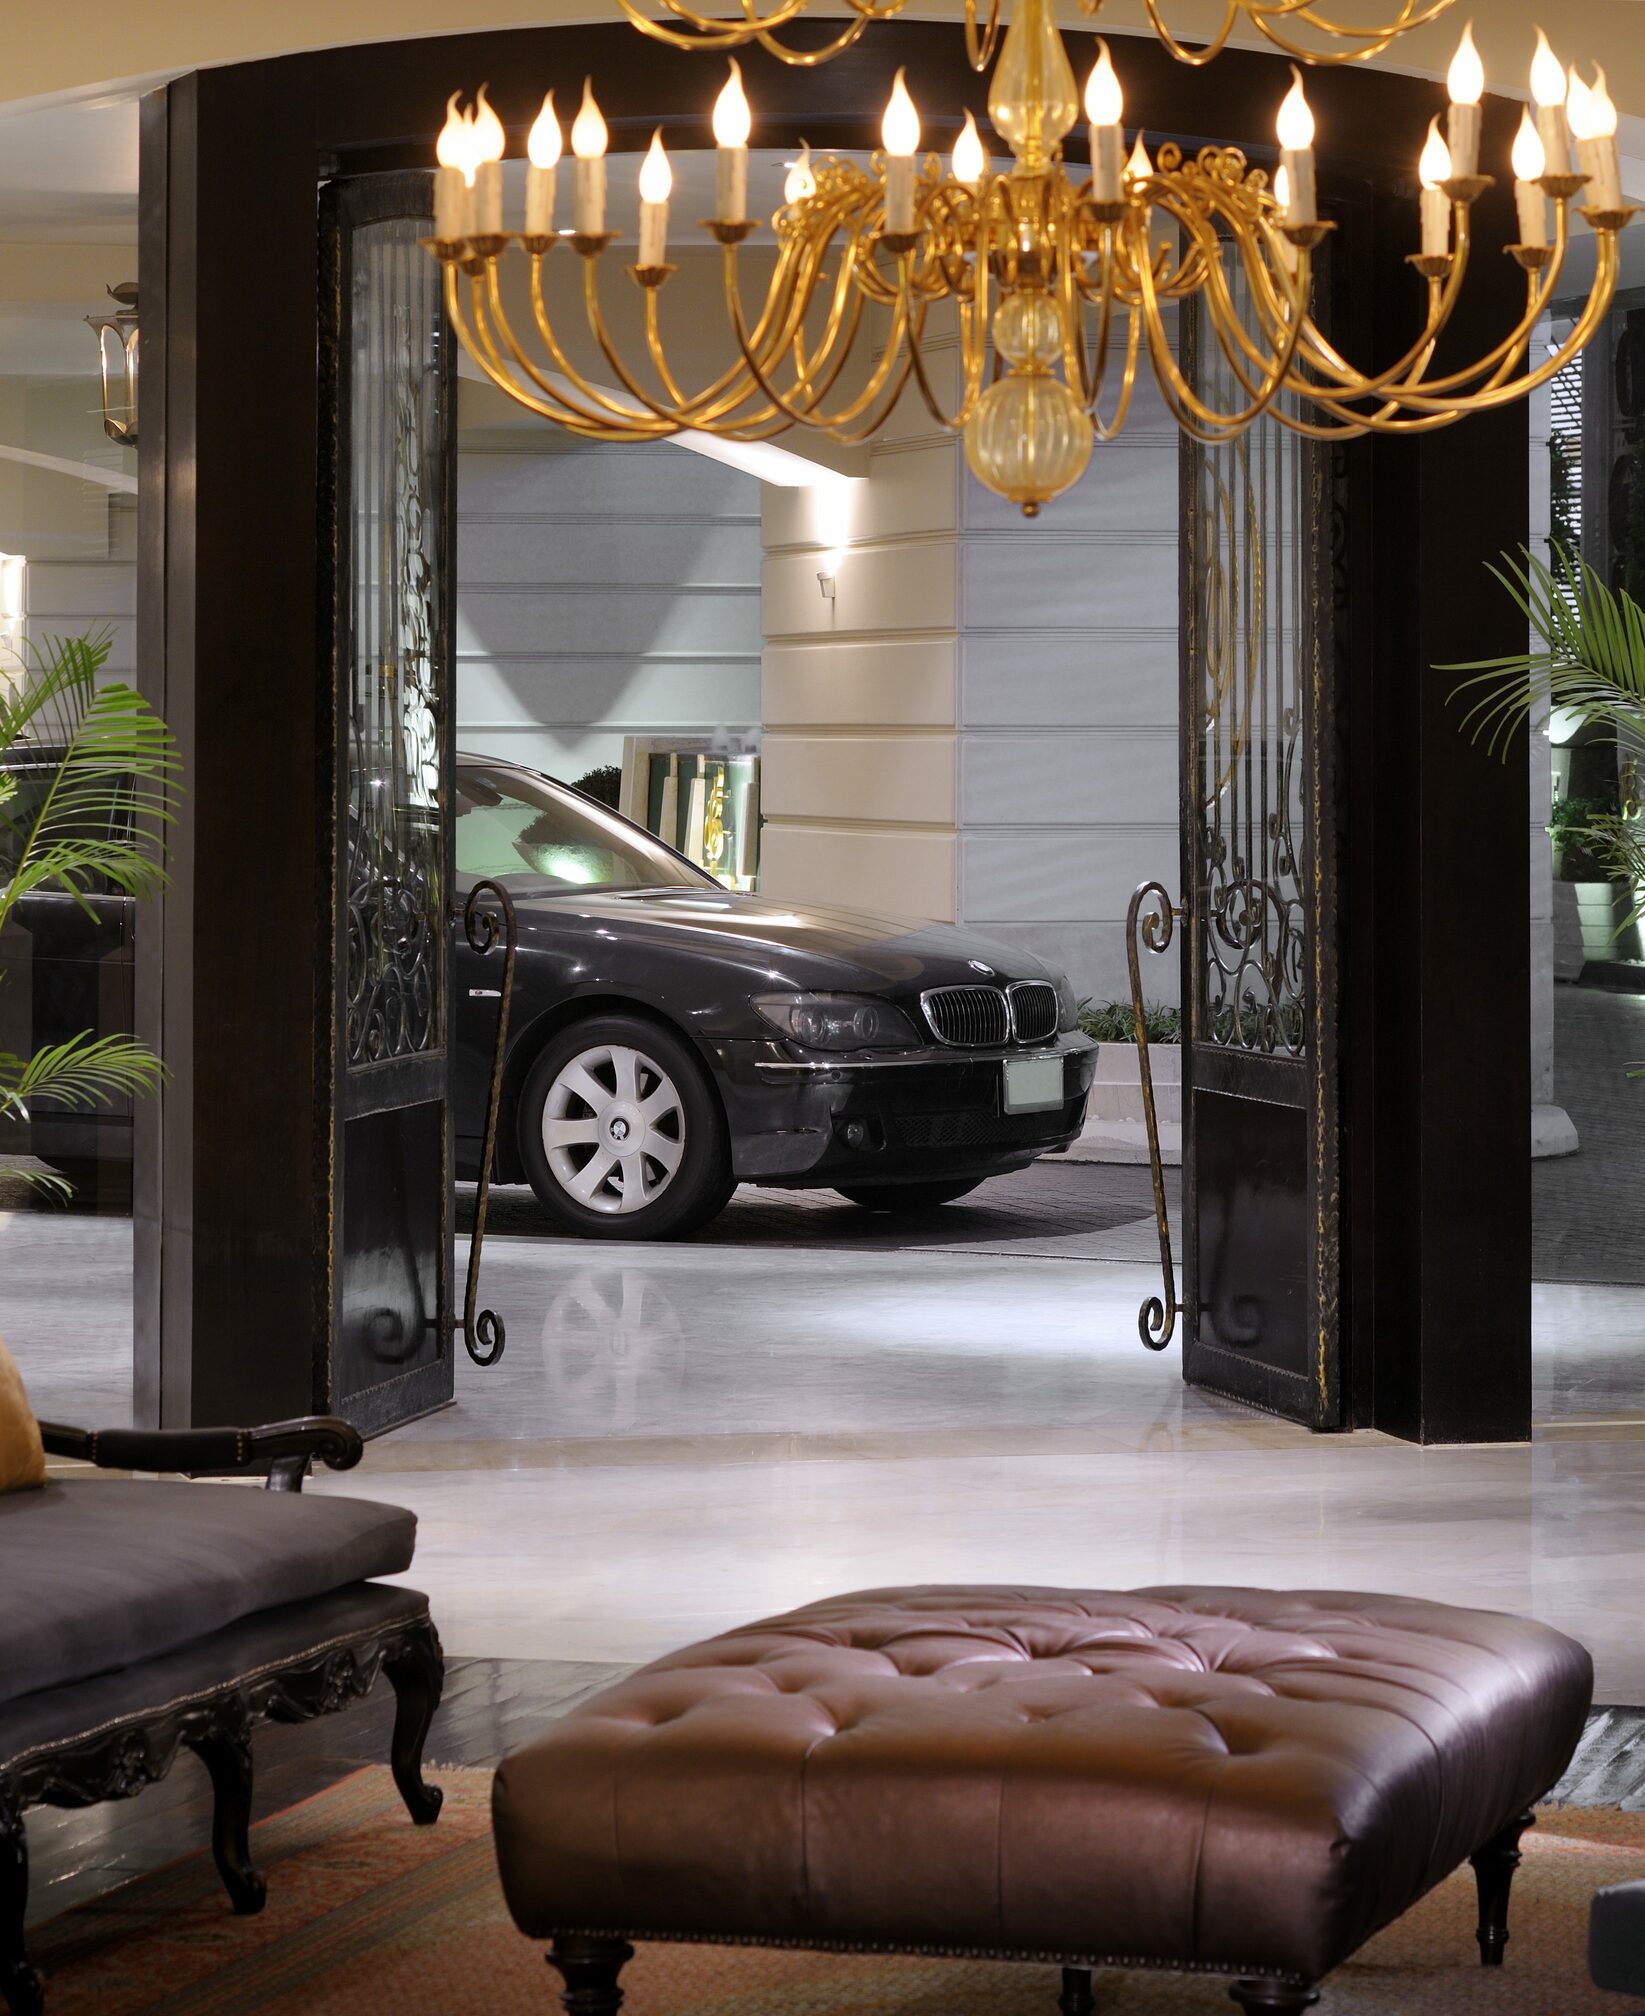 Hotel lobby with couch and car in the back